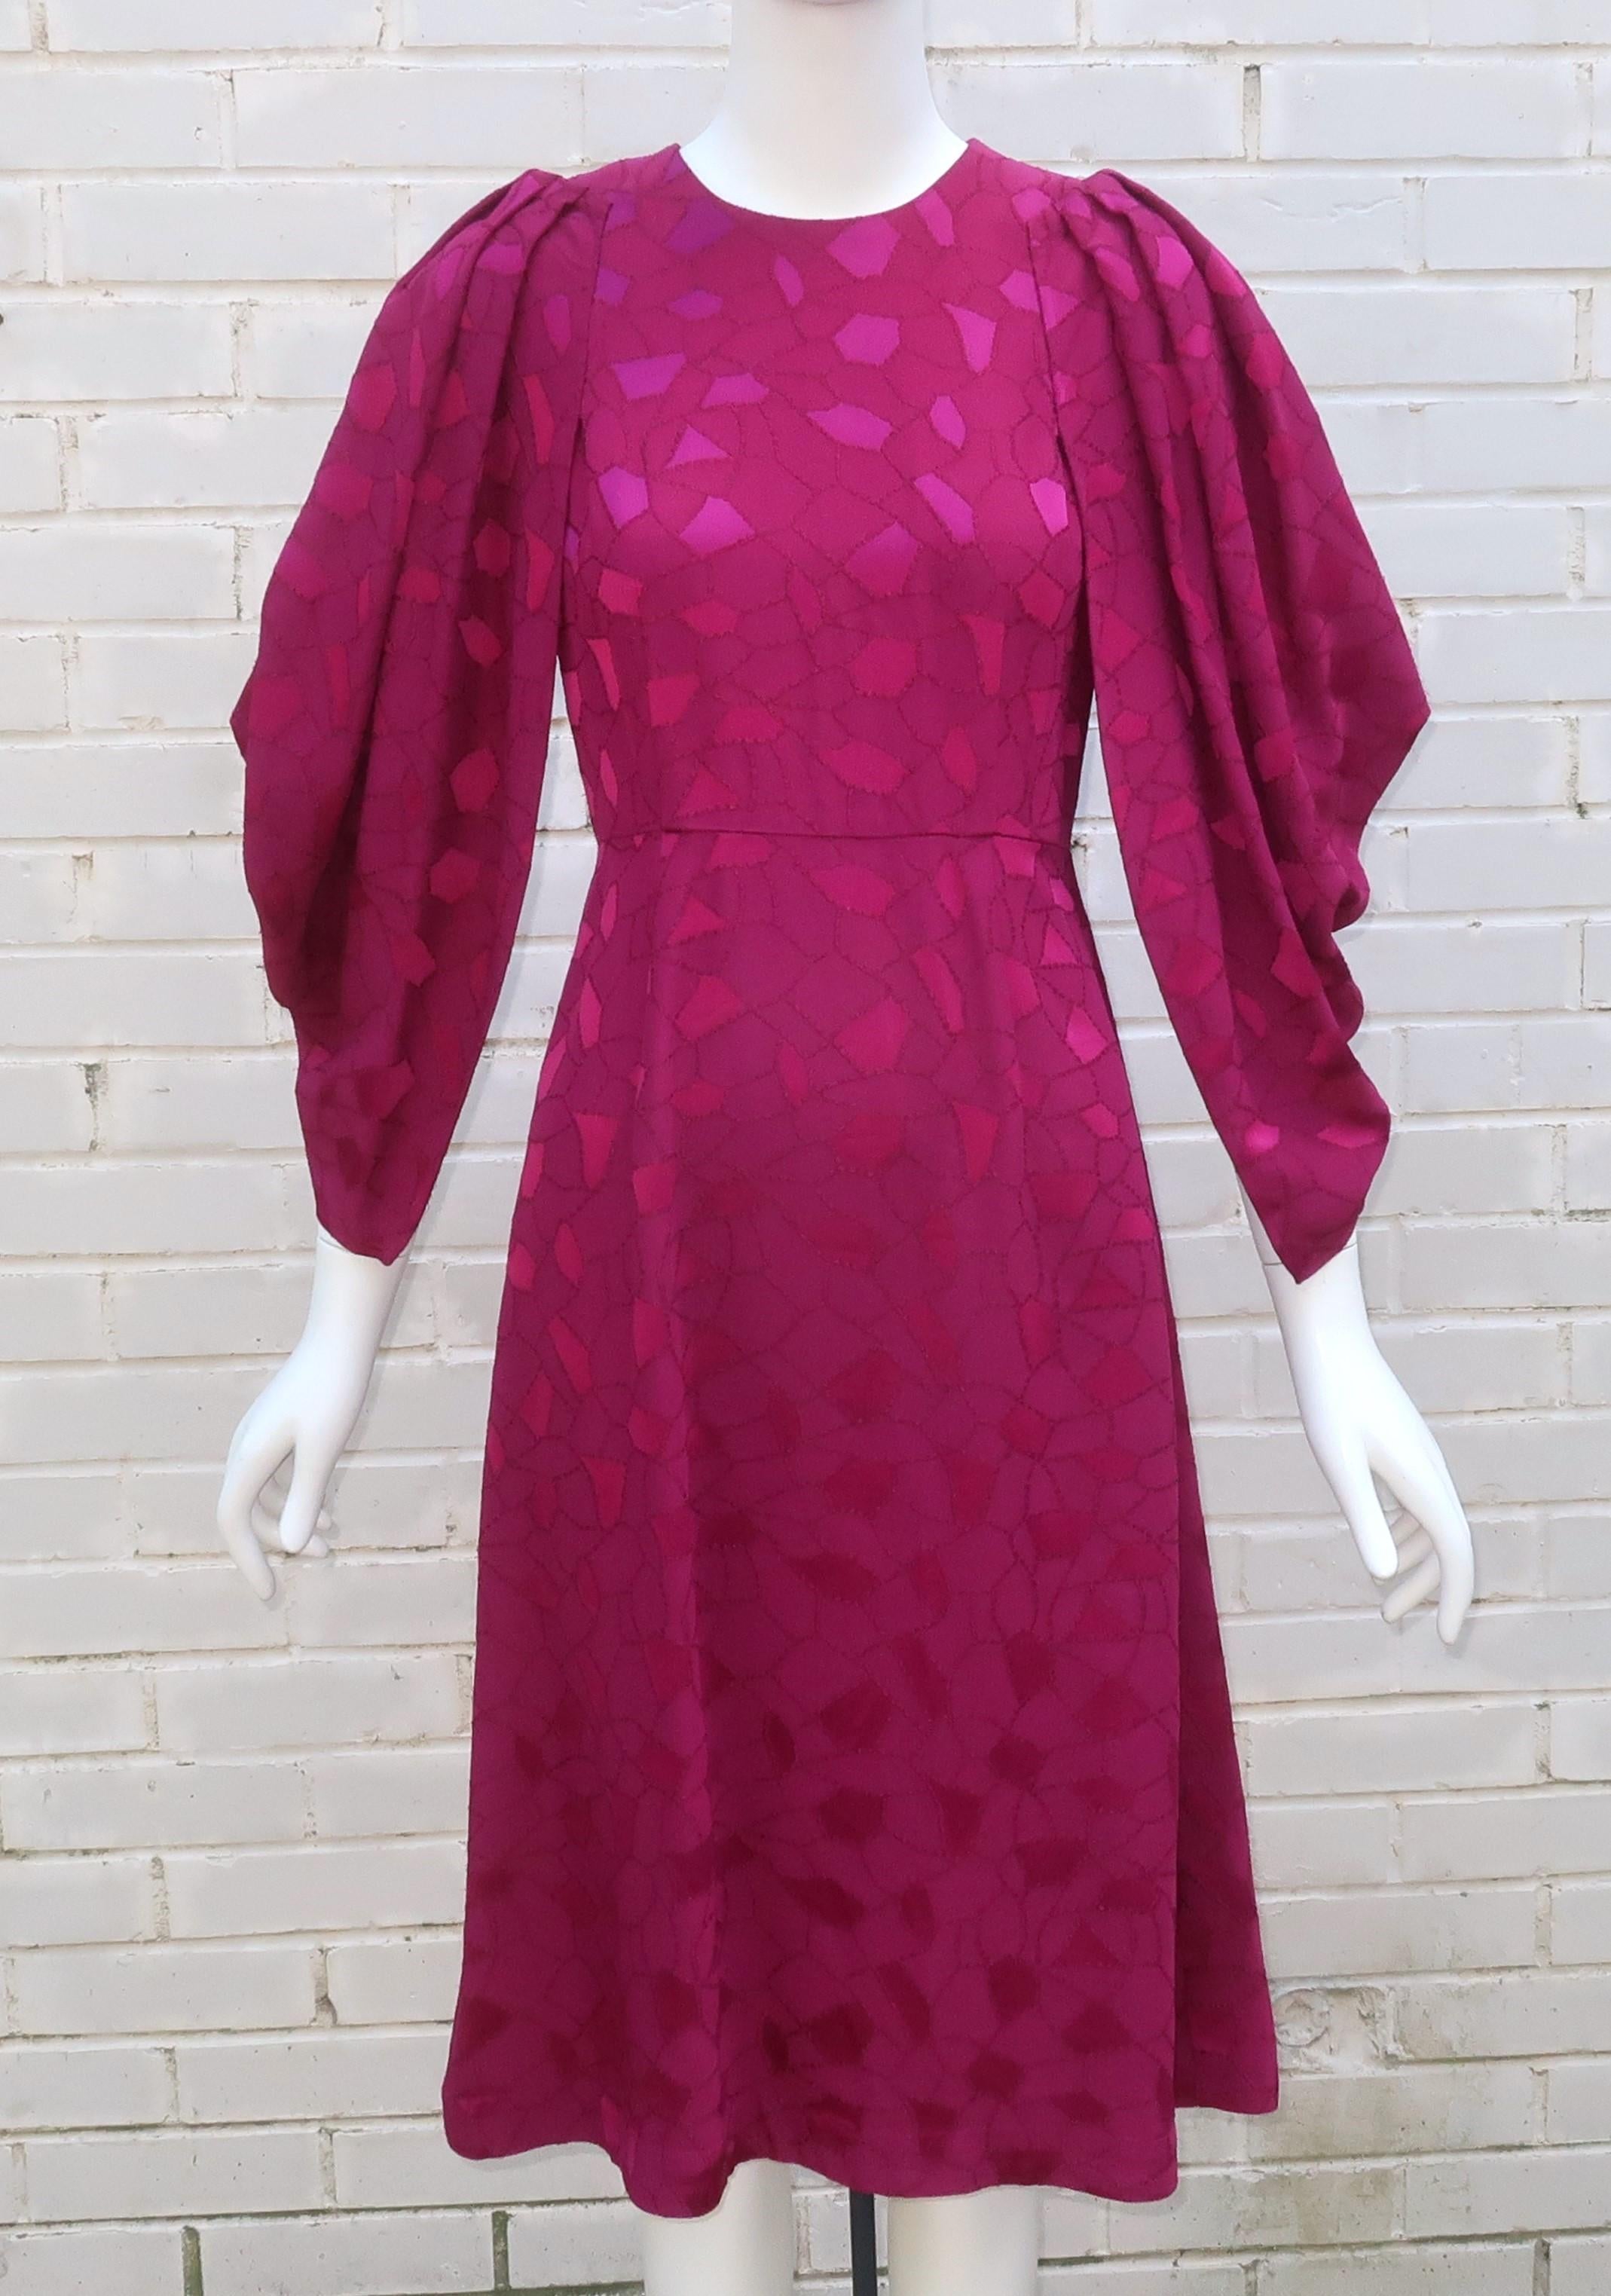 Gorgeous cocoon sleeved magenta dress by CO, a Los Angeles based brand.  The magenta fabric is a viscose and acetate blend with a weighty crepe feel and a look that is reminiscent of jacquard.  The dress zips and hooks at the back with a fitted